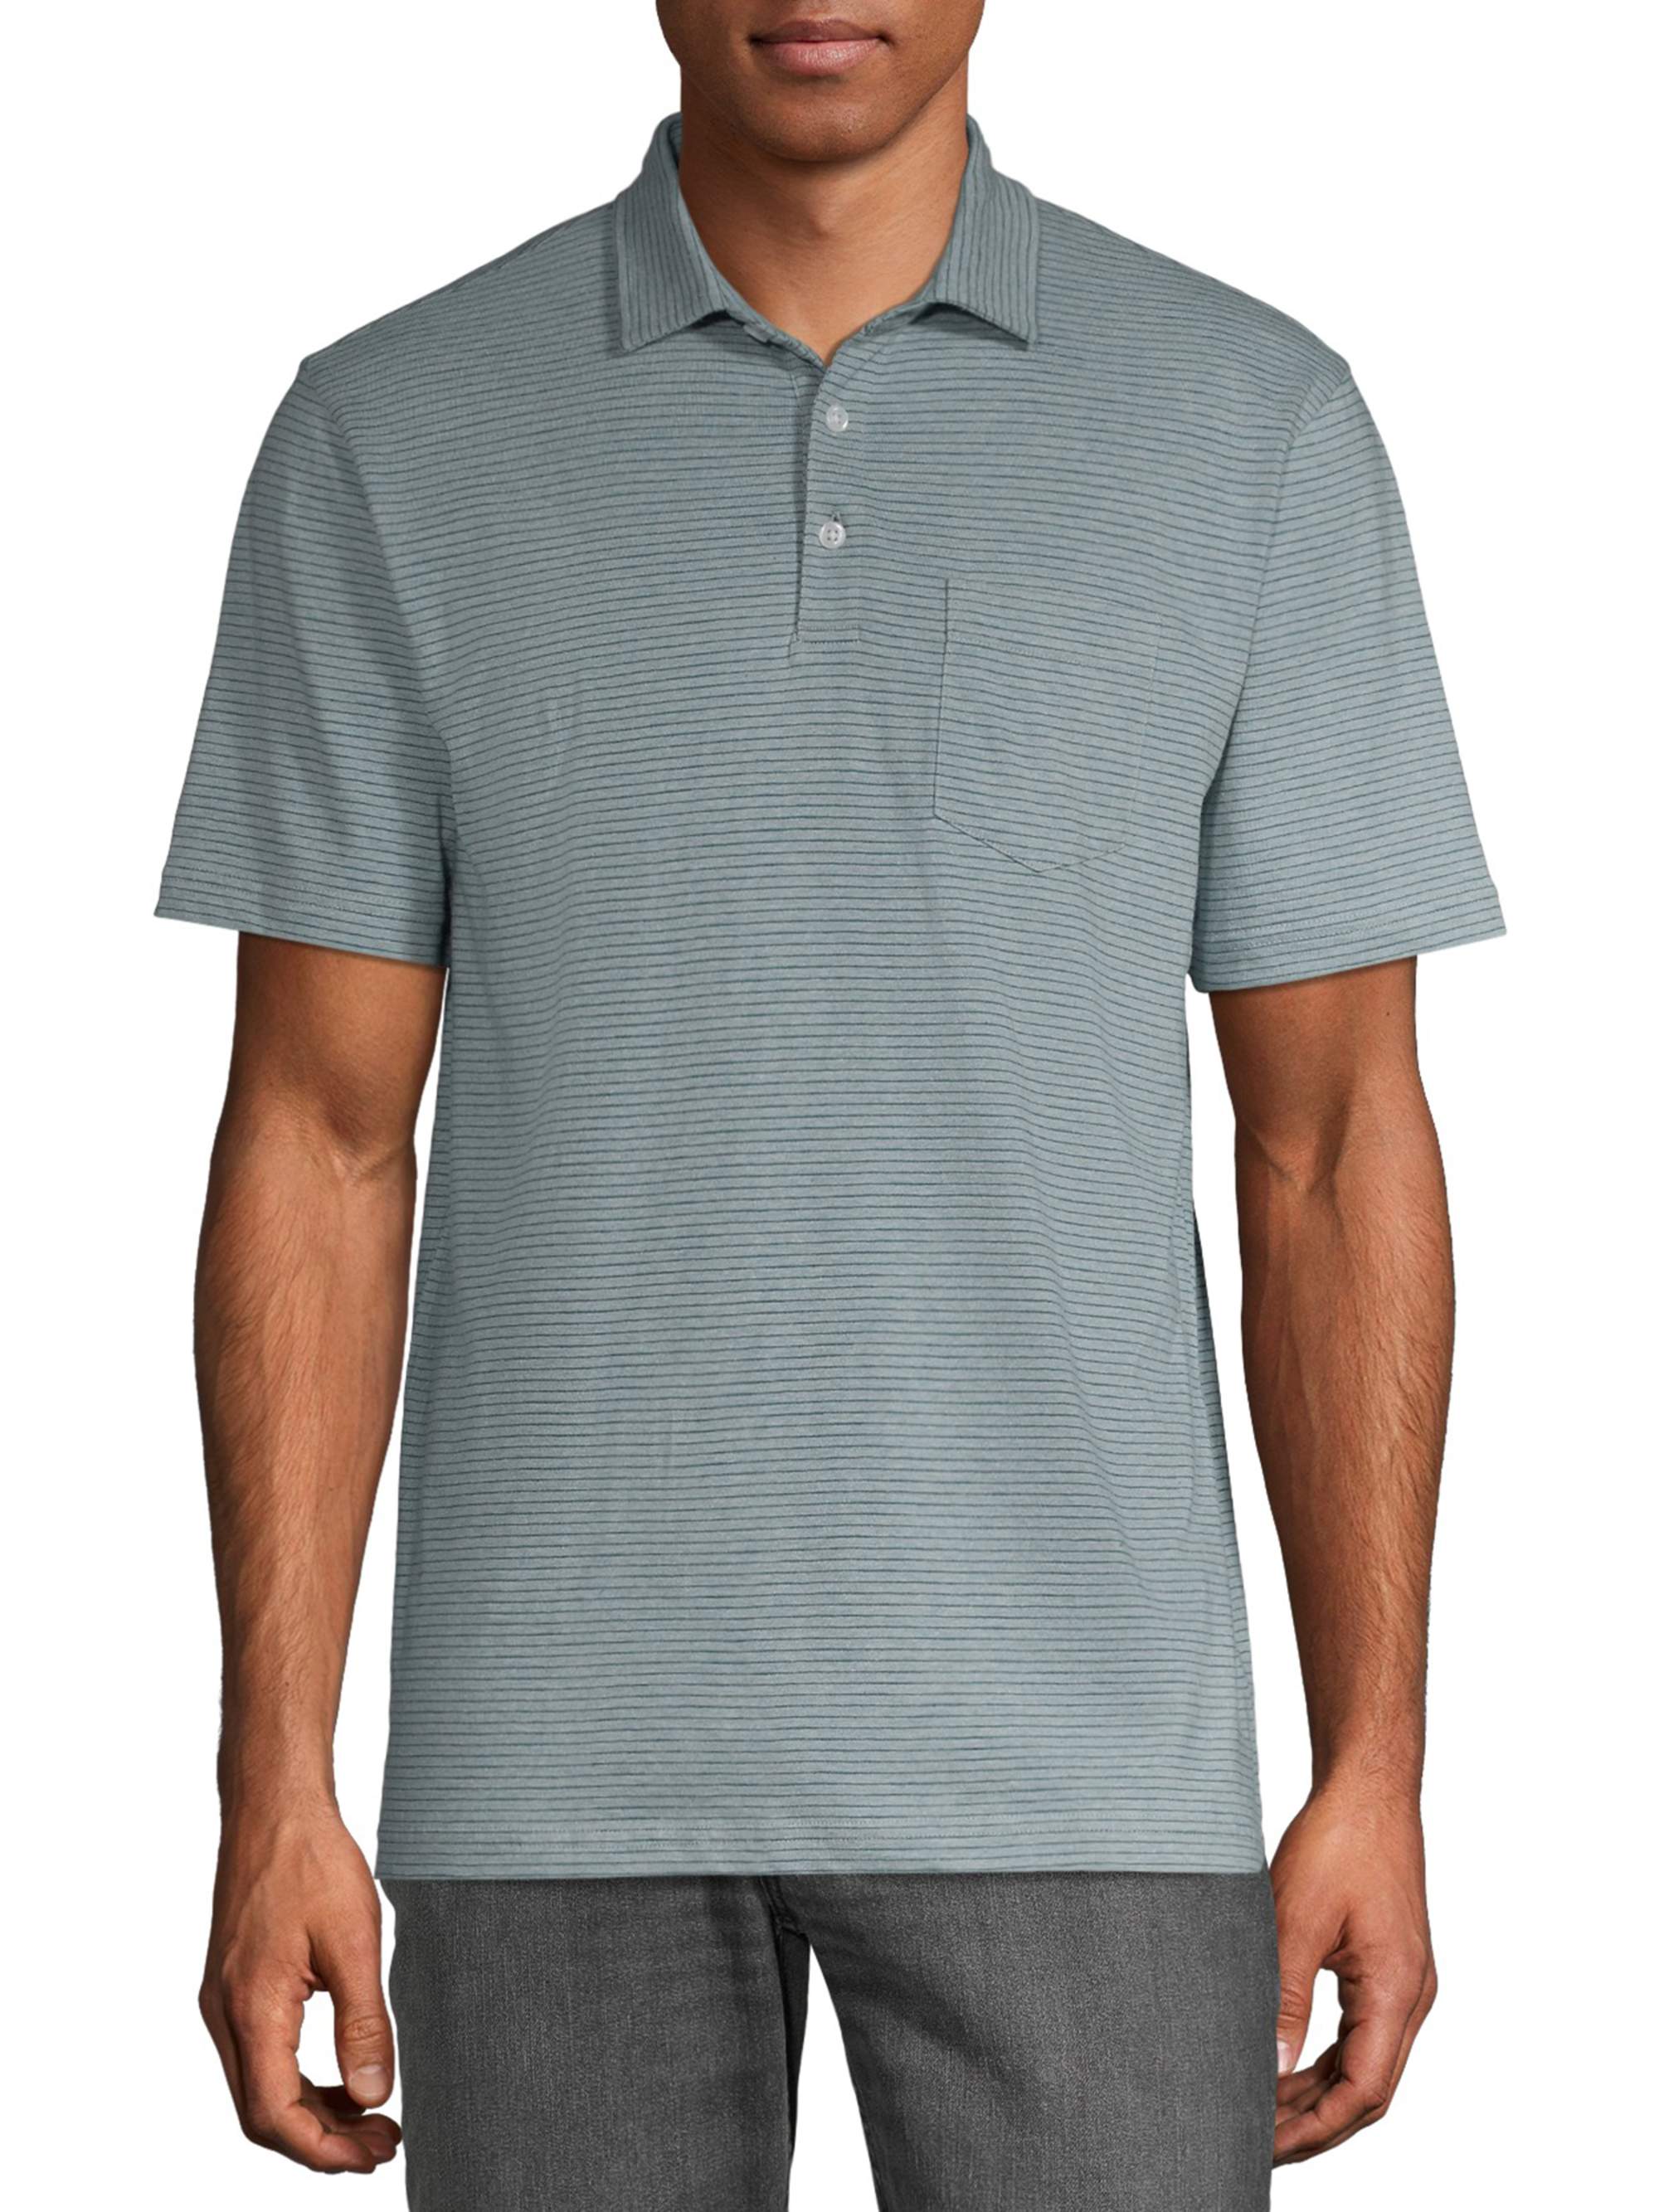 Men’s Jersey Polo Only $5.50 a...